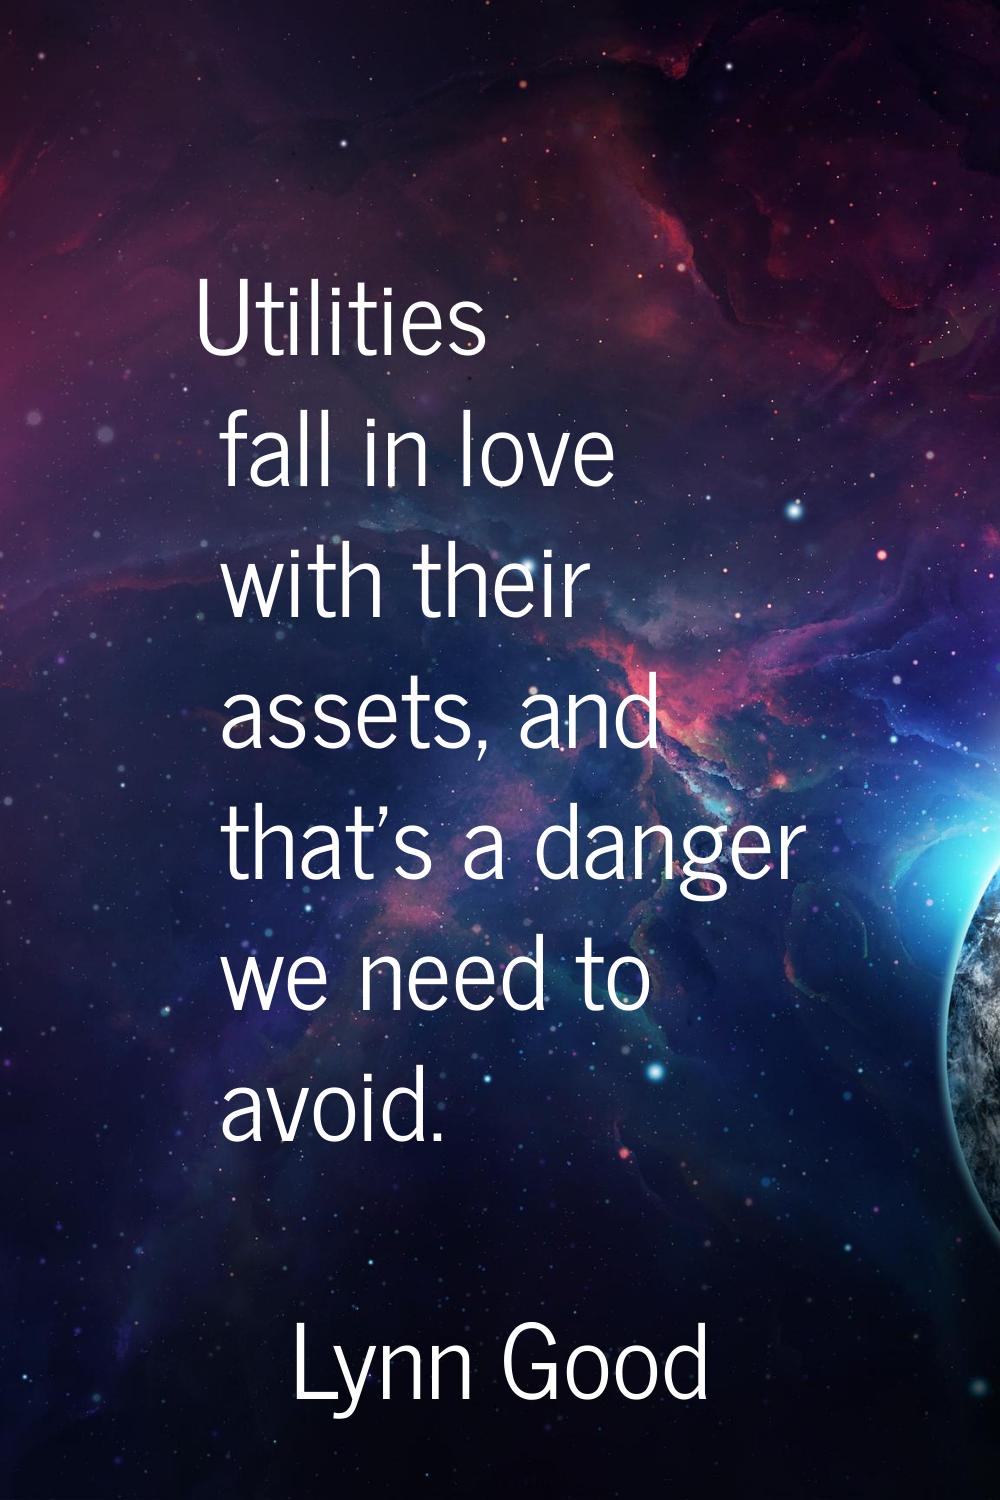 Utilities fall in love with their assets, and that's a danger we need to avoid.